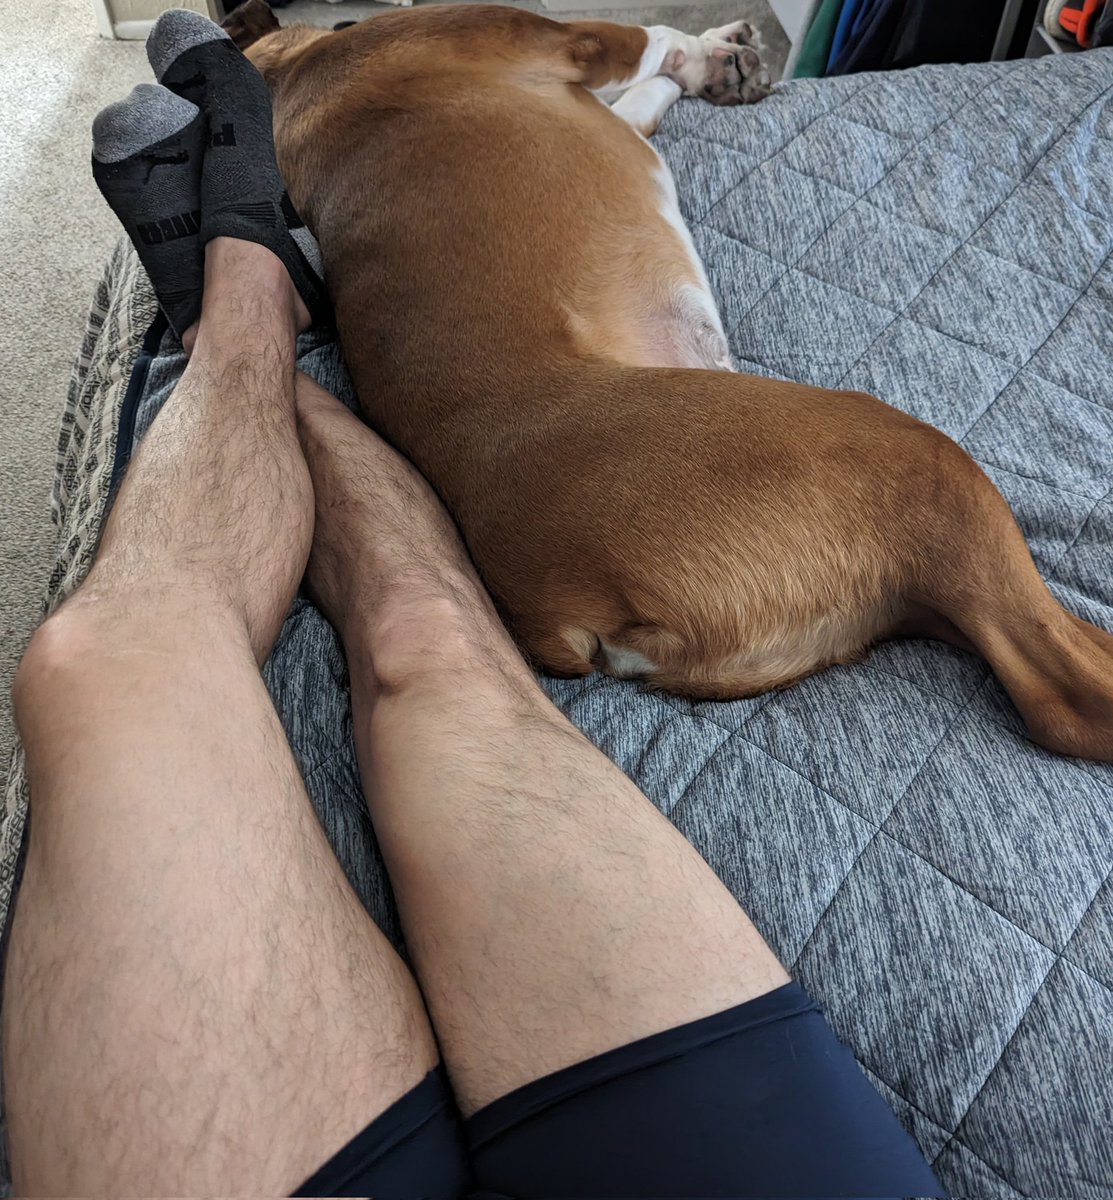 Long day. Relaxing with my dude. #thighThurs